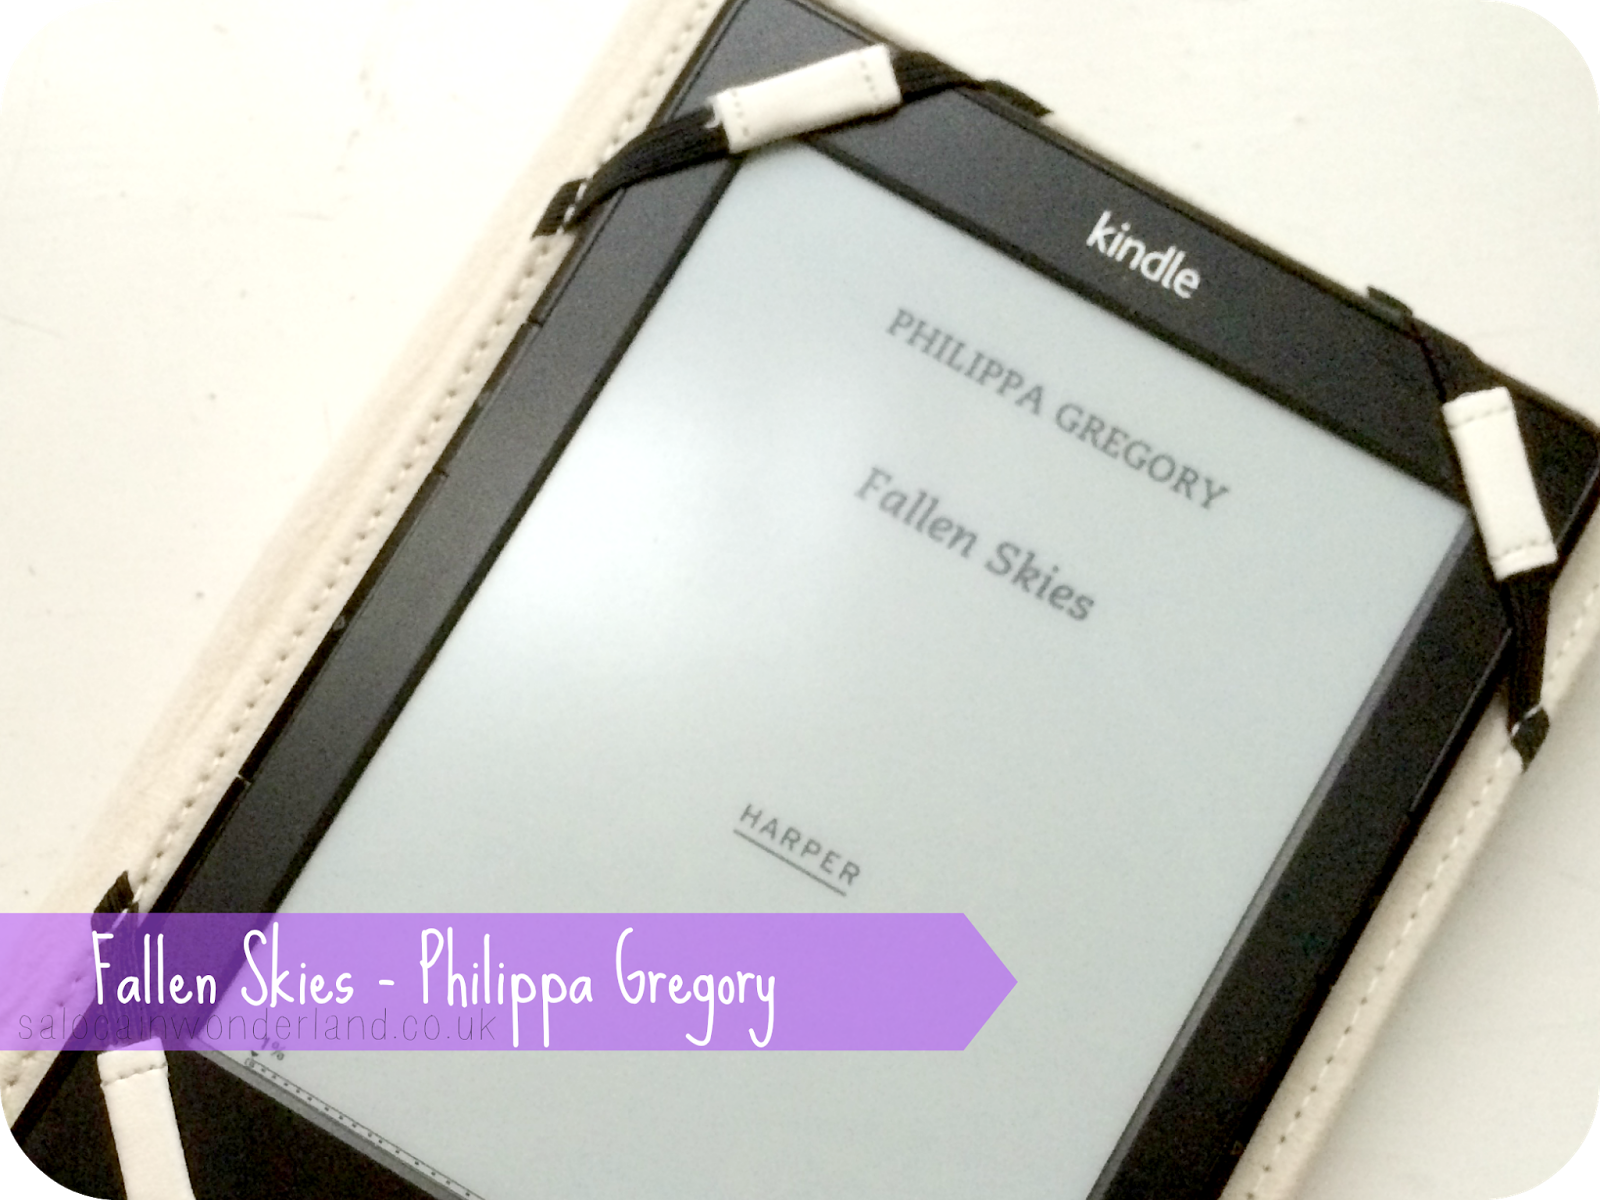 Fallen Skies - Philippa Gregory Review